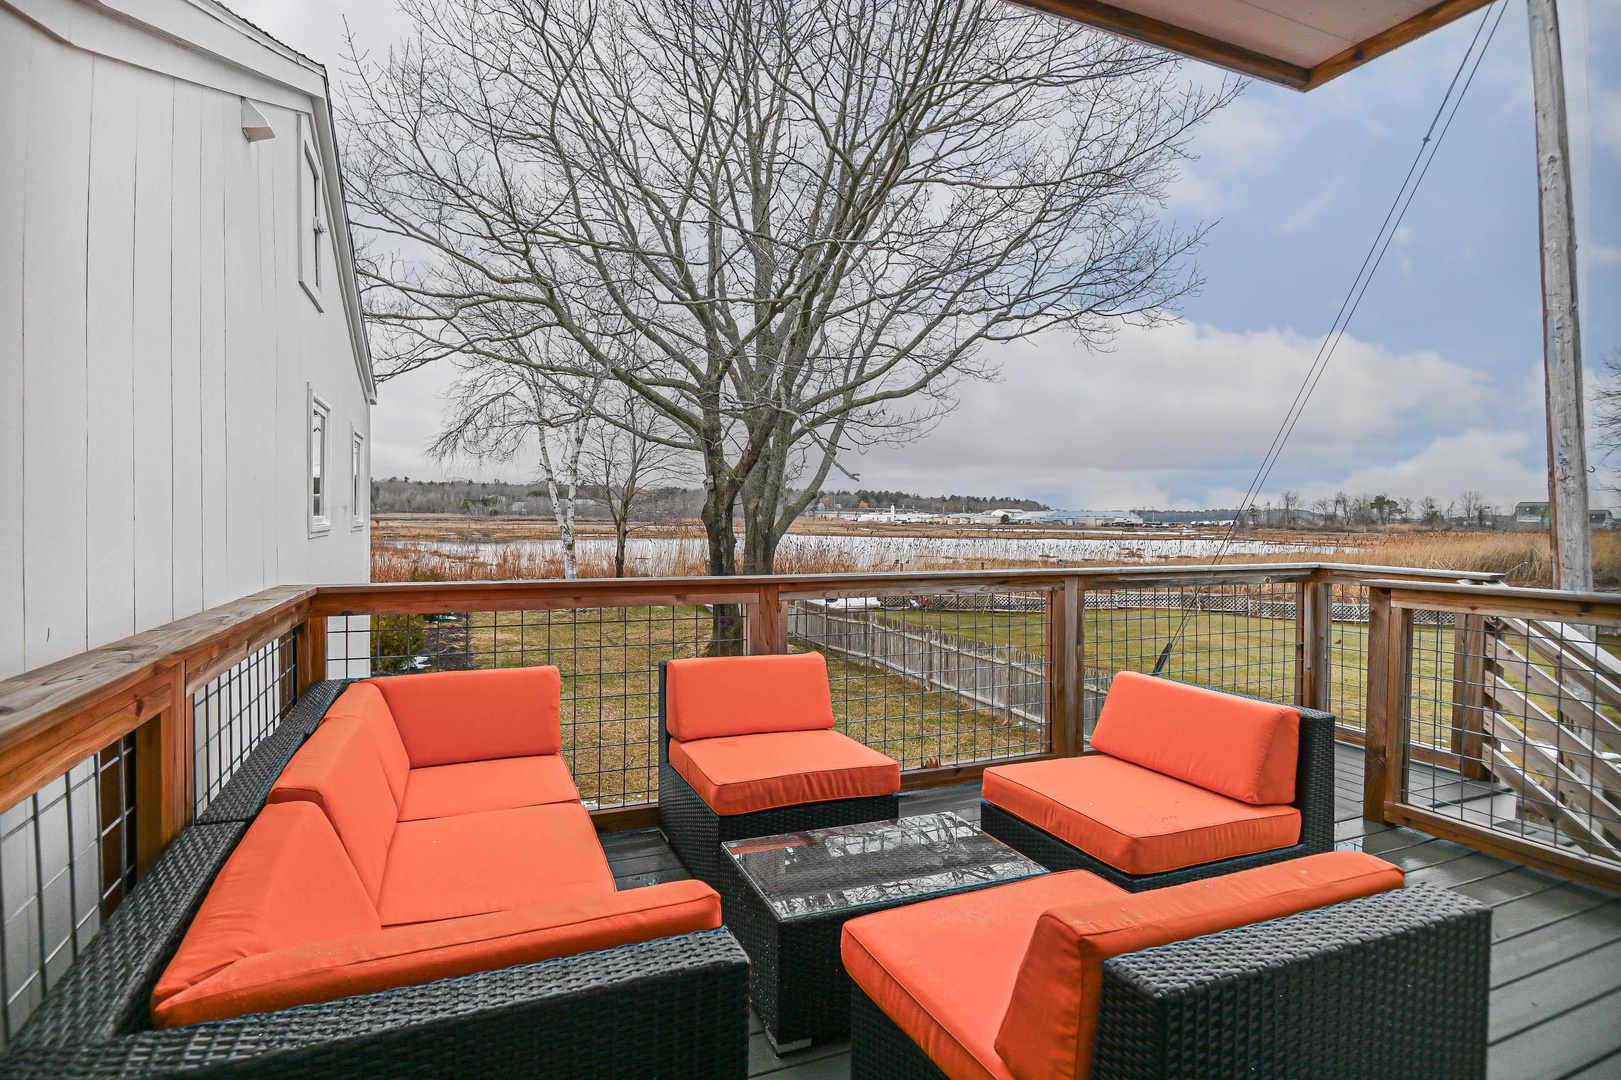 Breathe in the fresh air and soak in the marsh views from the decks